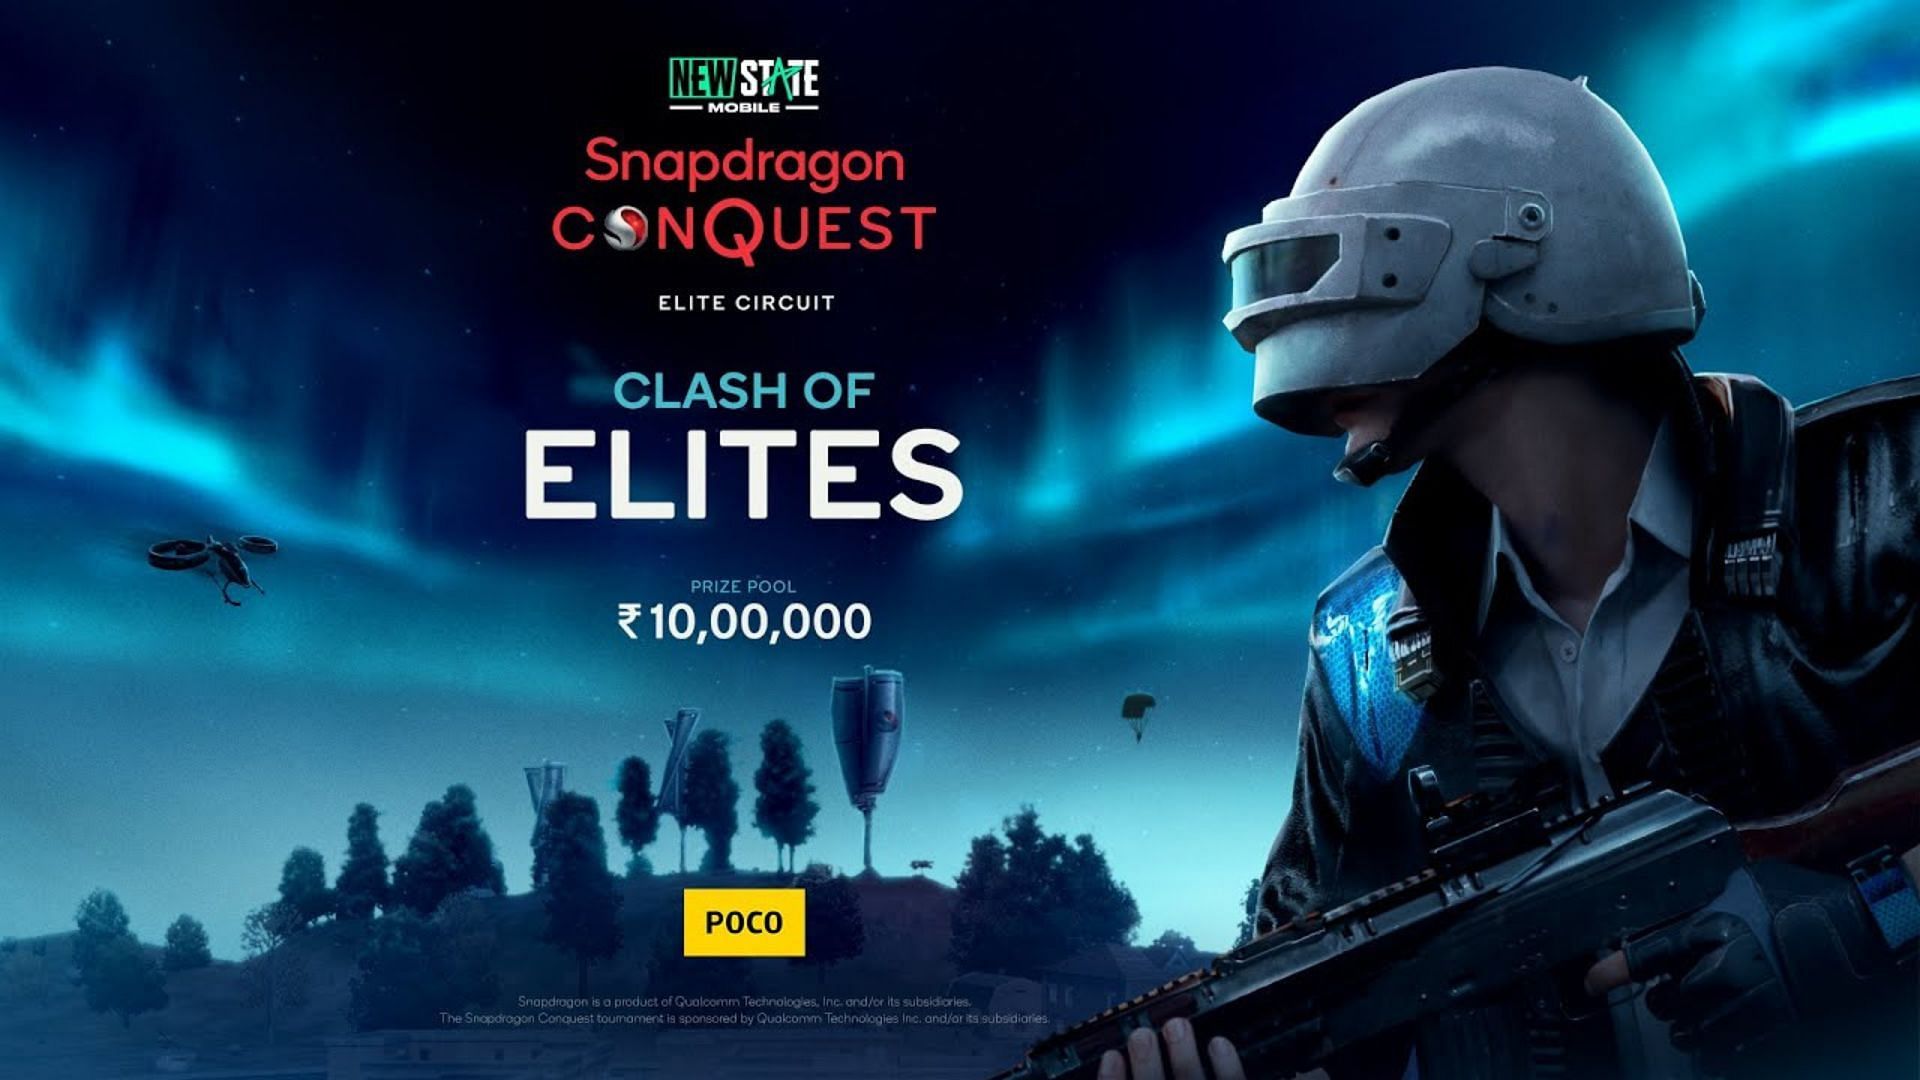 Snapdragon Conquest PUBG New State Finale starts on June 16 (Image via Snapdragon)